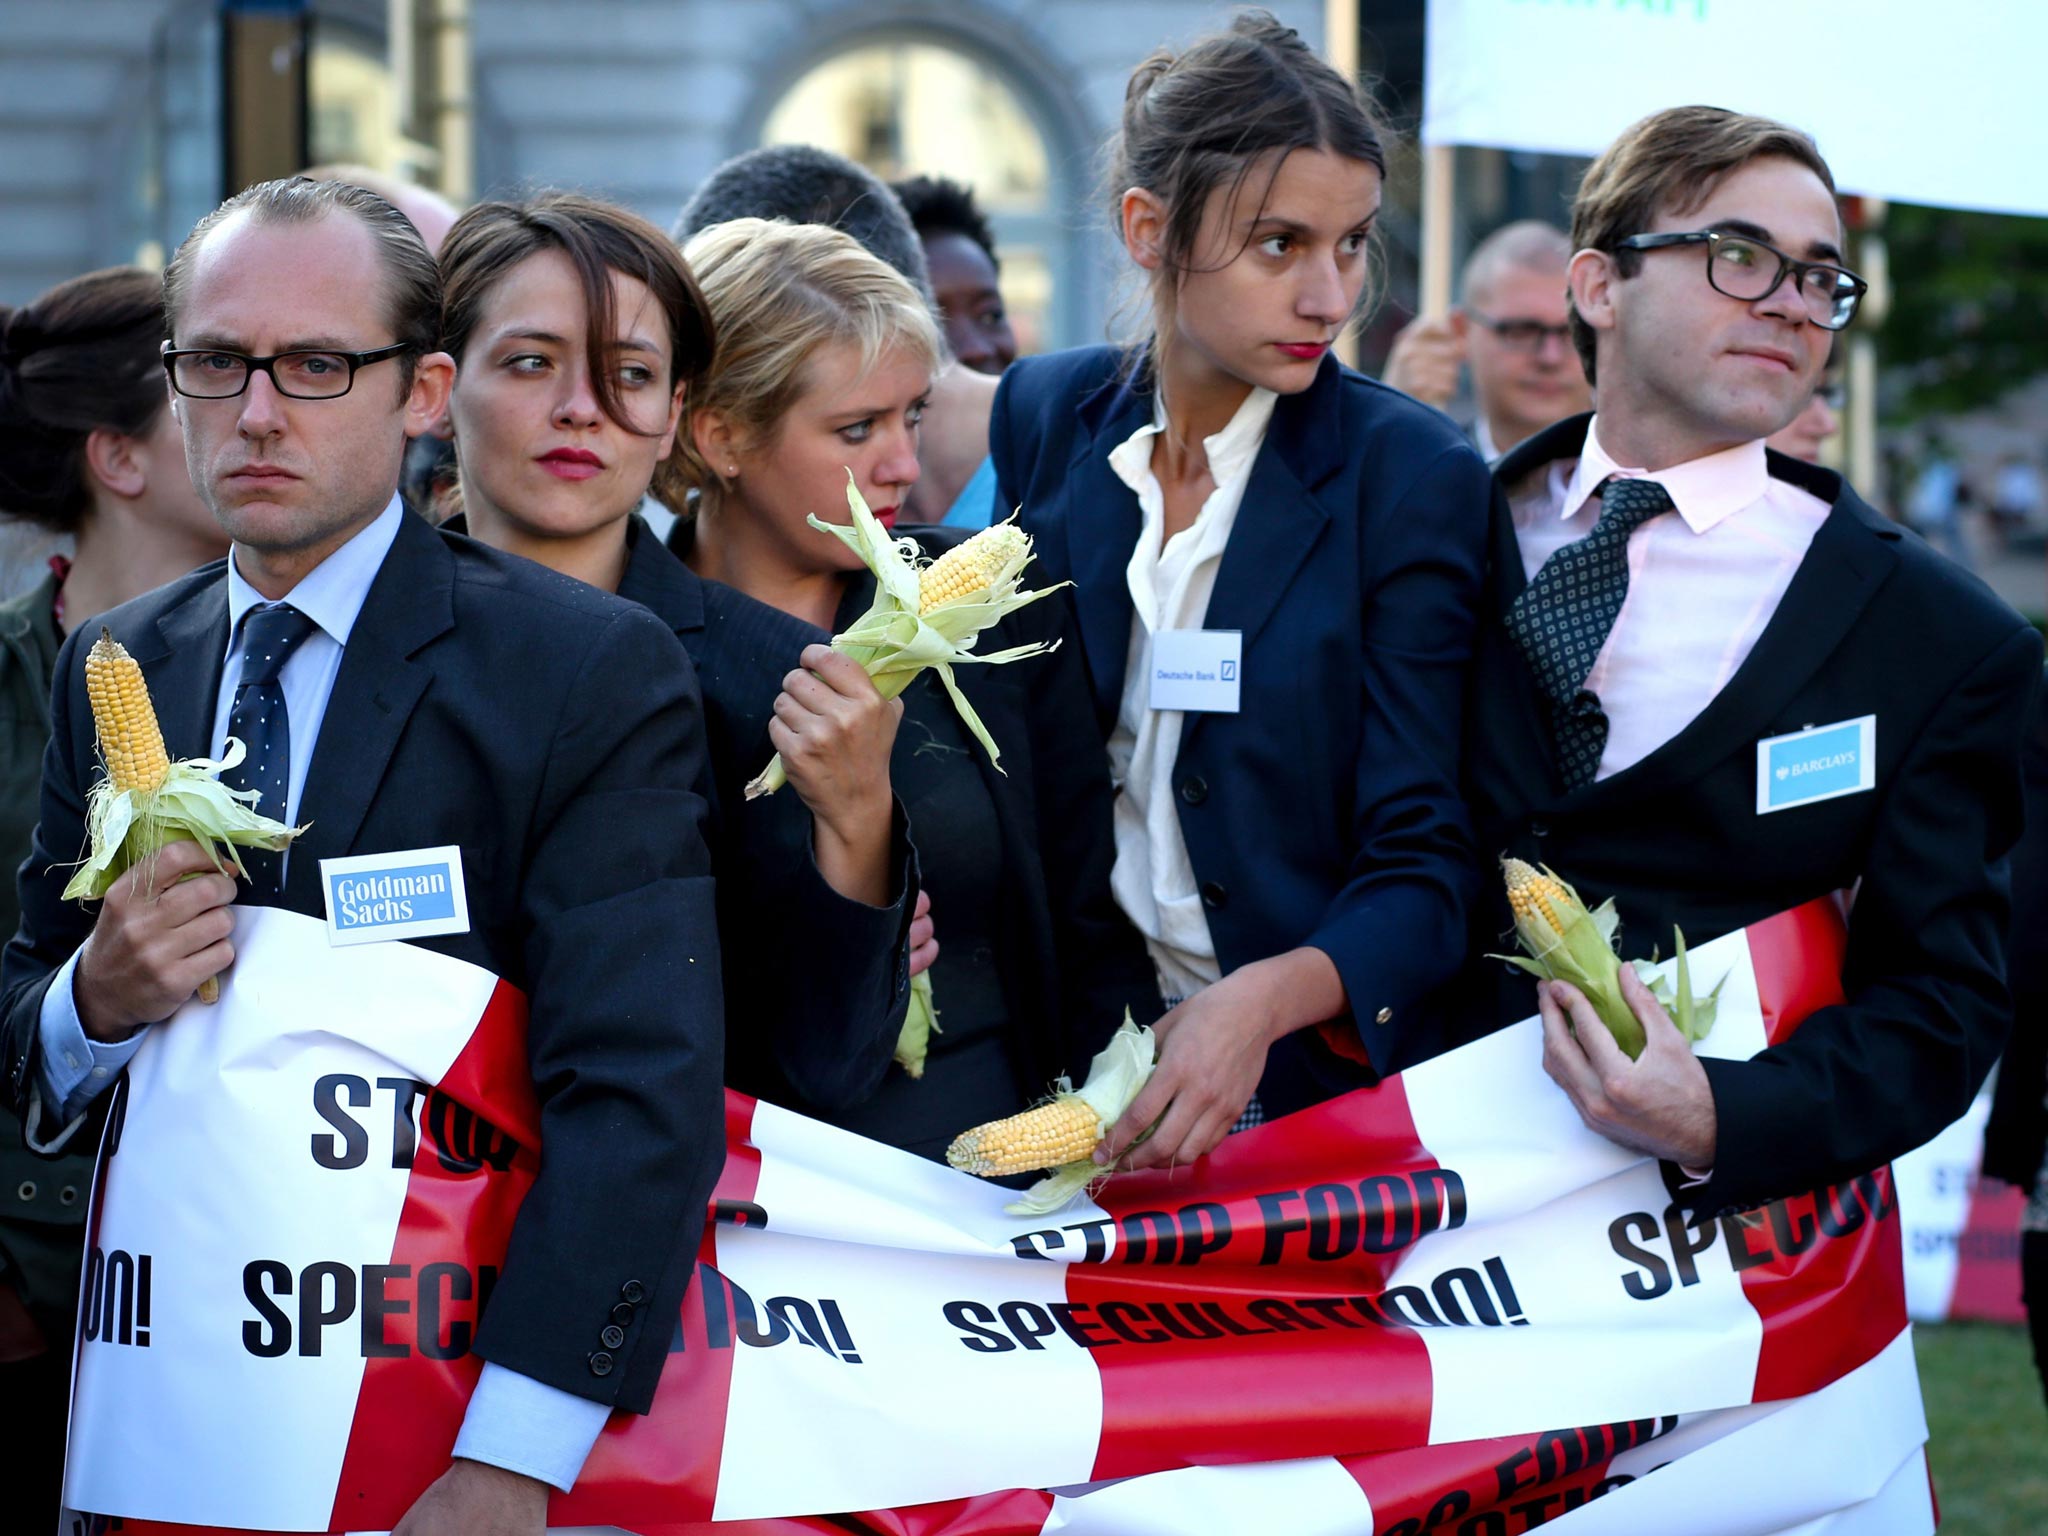 4 September 2013: Environmental activists of 'Friends of the Earth Europe' dressed as bankers hold corn cobs as they demonstrate near the European parliament in Brussels, Belgium